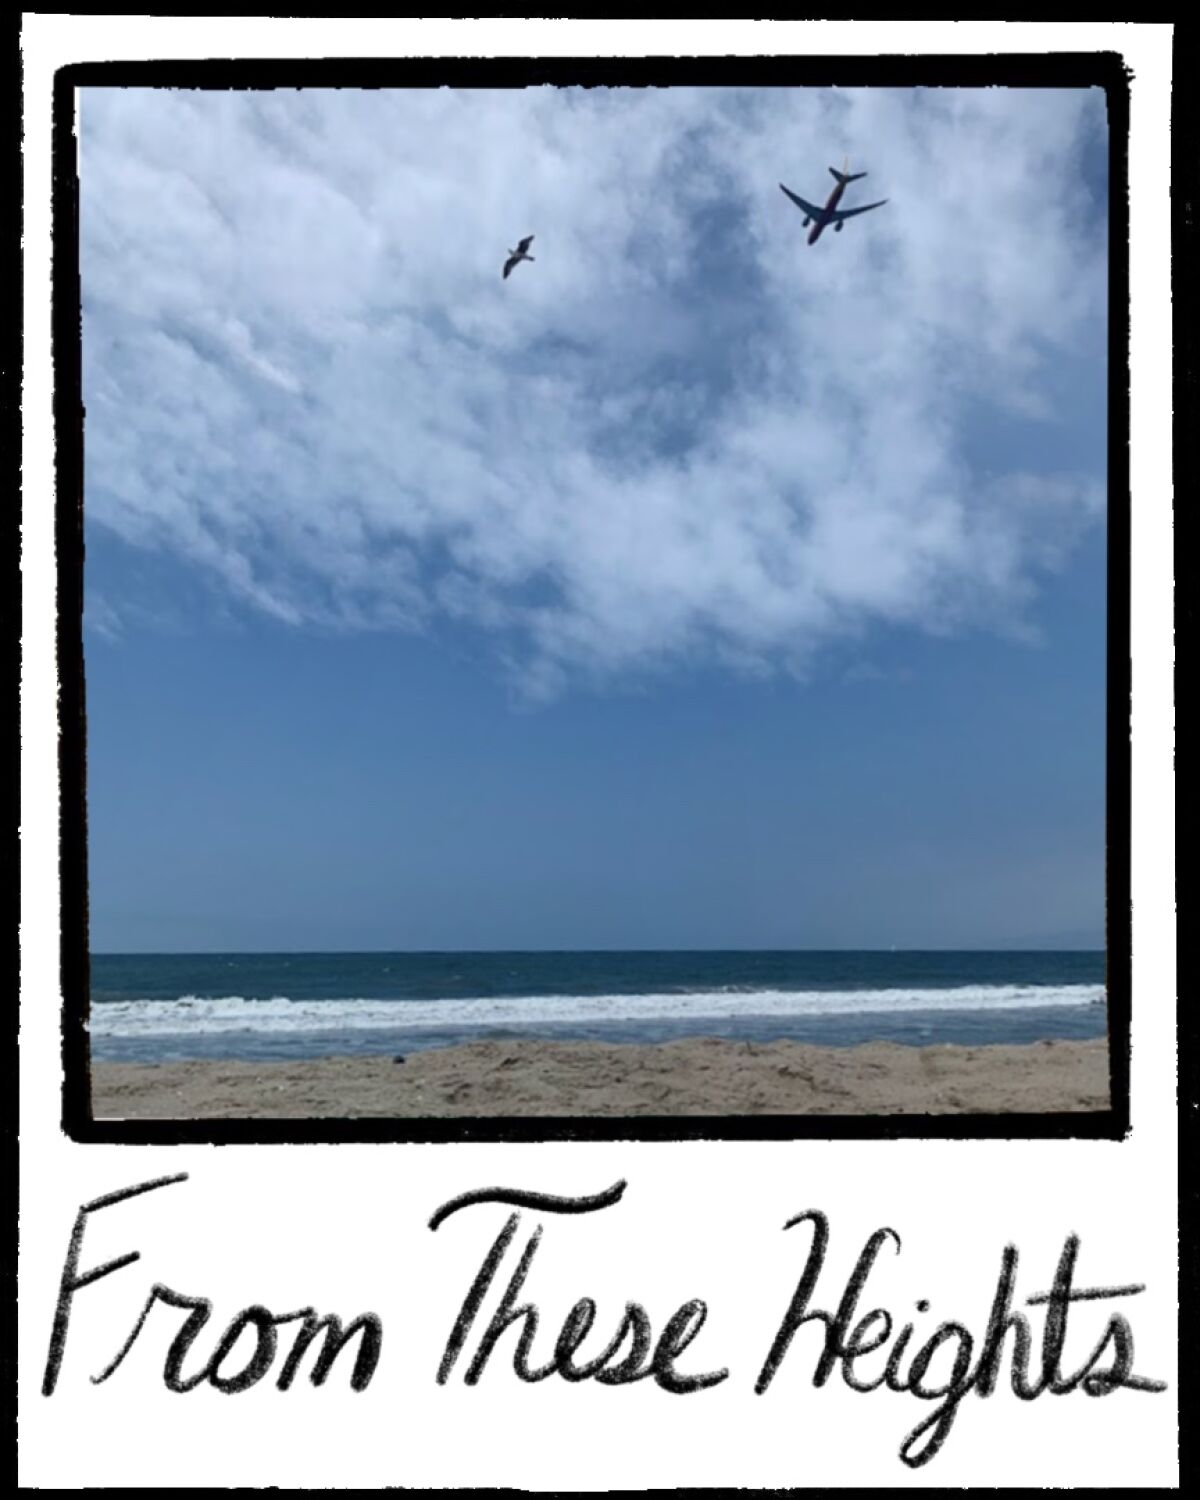 Photo of plane taking off over the beach near LAX.  